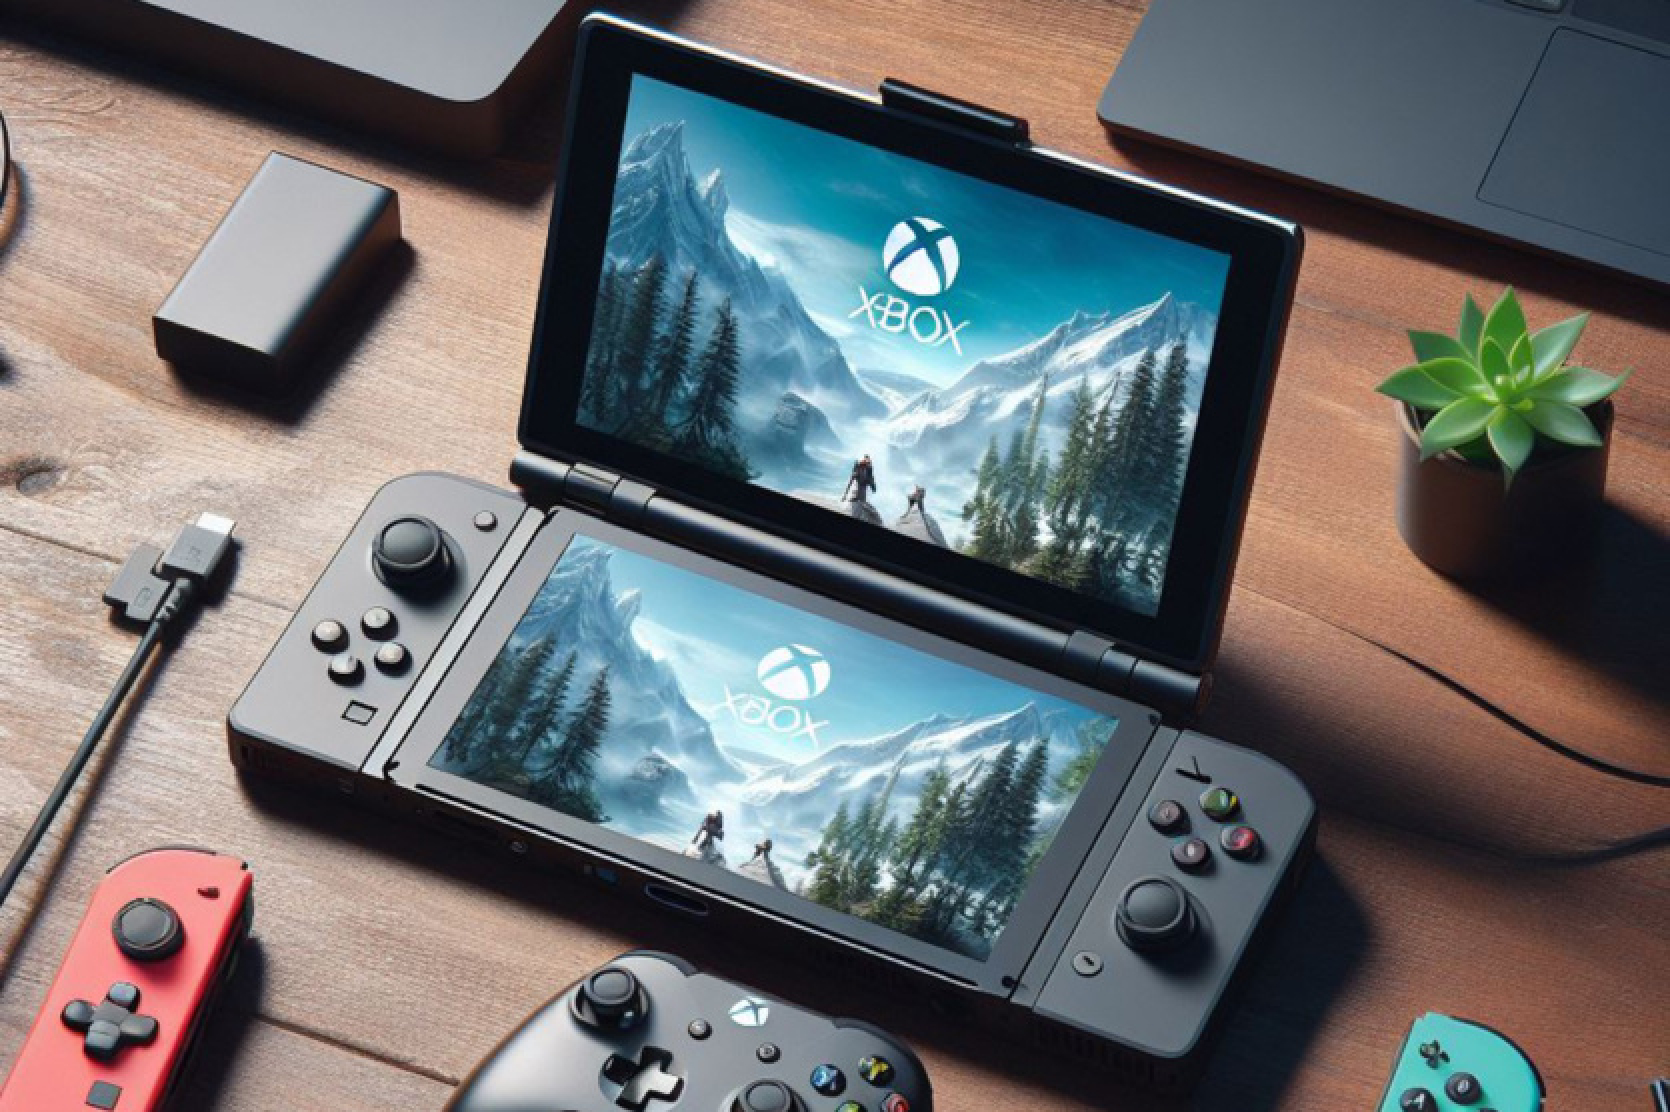 Xbox is preparing a full-fledged handheld console and there are new prototypes - unofficially